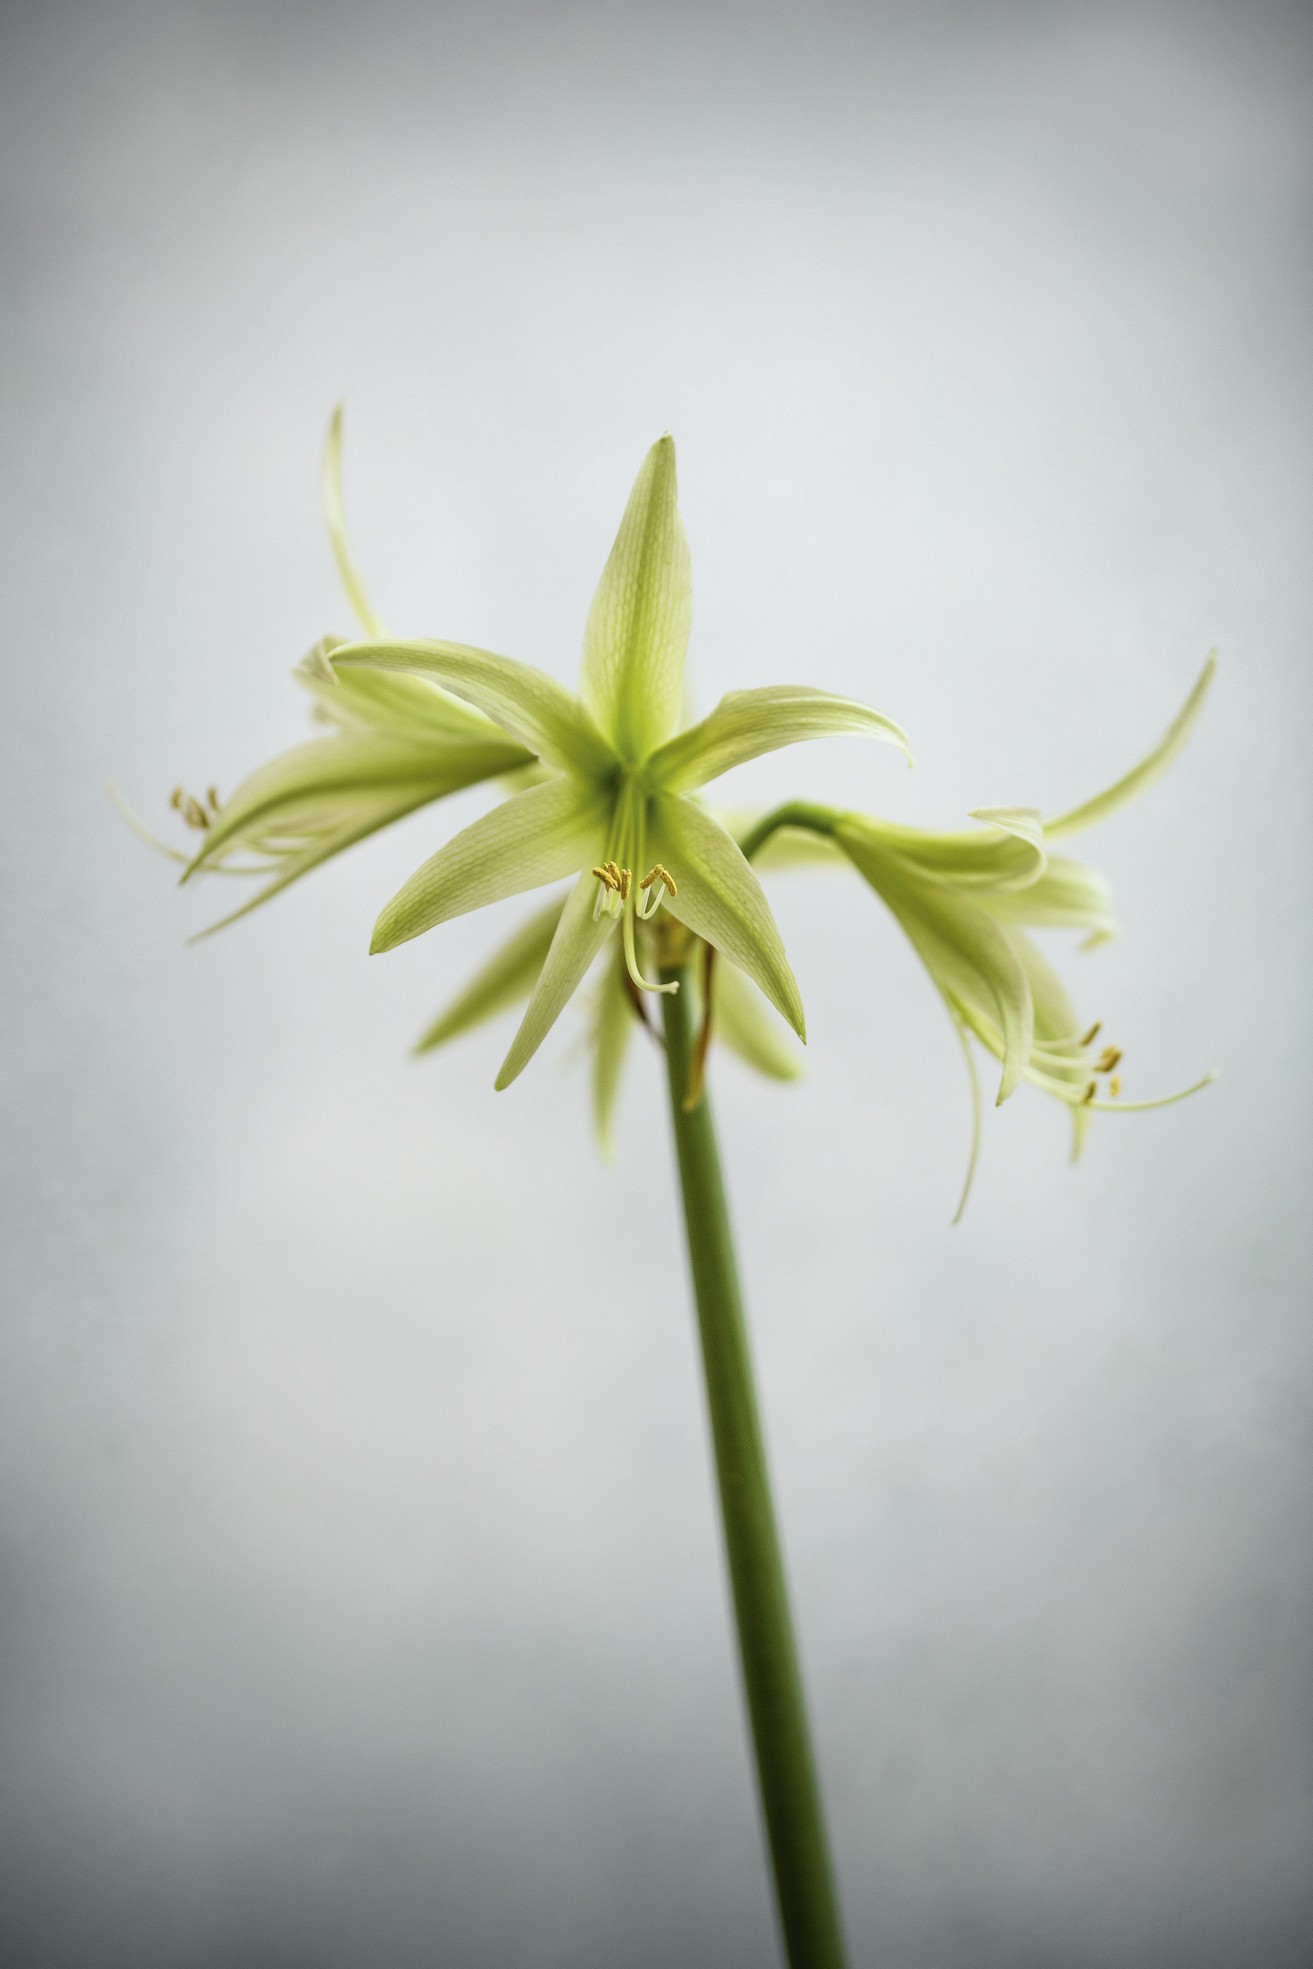  Hippeastrum ‘Evergreen’ Its narrow, flaring petals are lime green, becoming darker towards the centre of the flower, from where the green stamens protrude. It belongs to the Spider Group and must be one of the most subtle and stylish amaryllis. 50cm. AGM*. RHS H2.